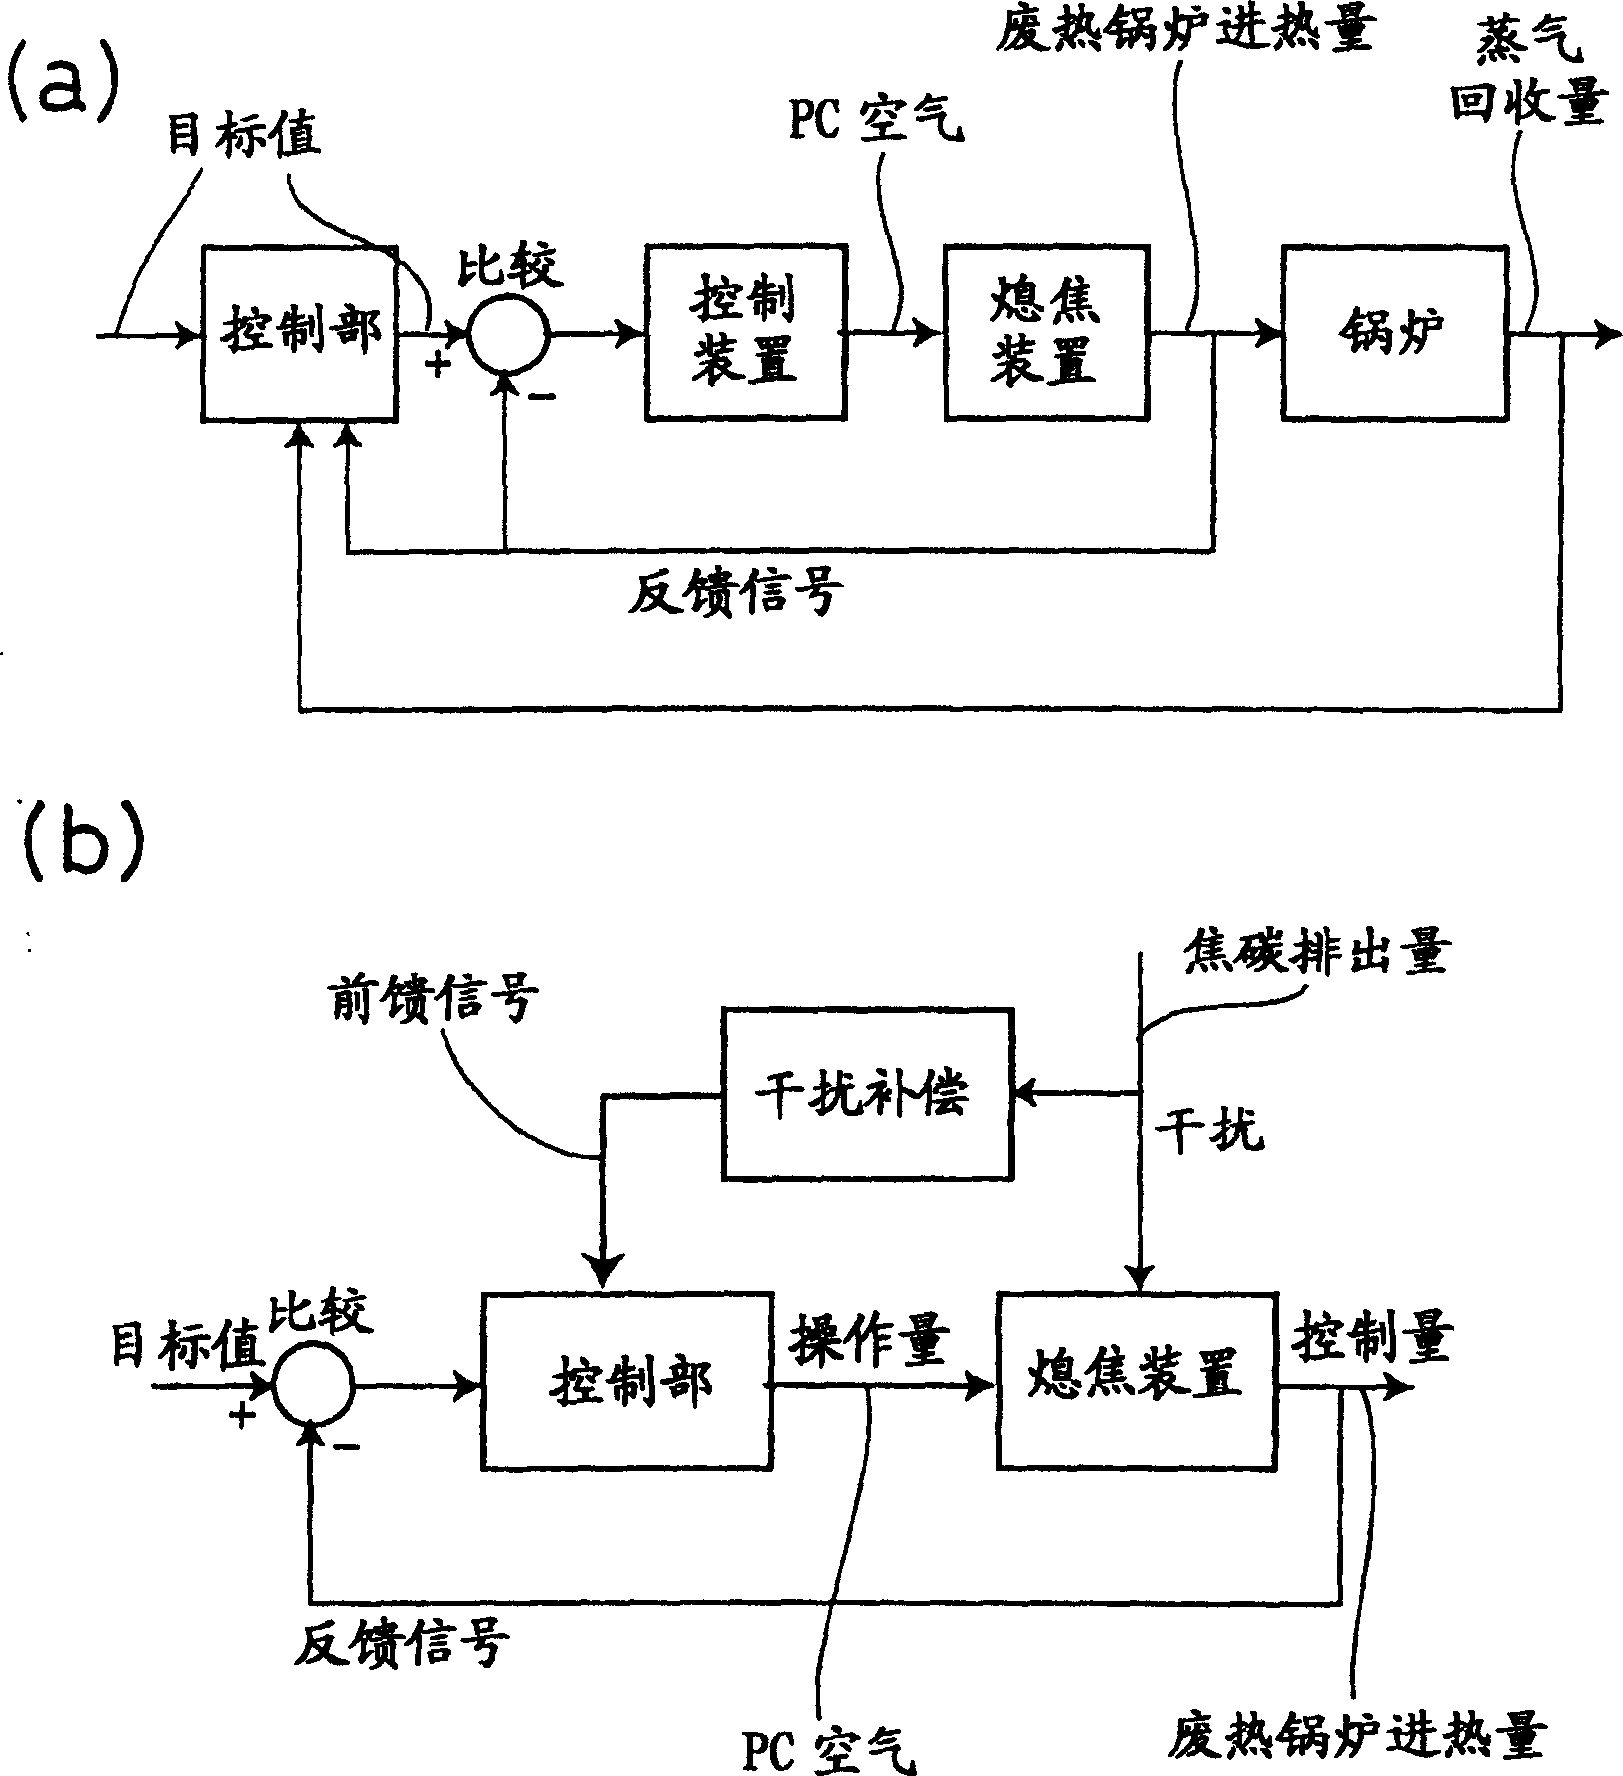 Coke dry quenching method and system